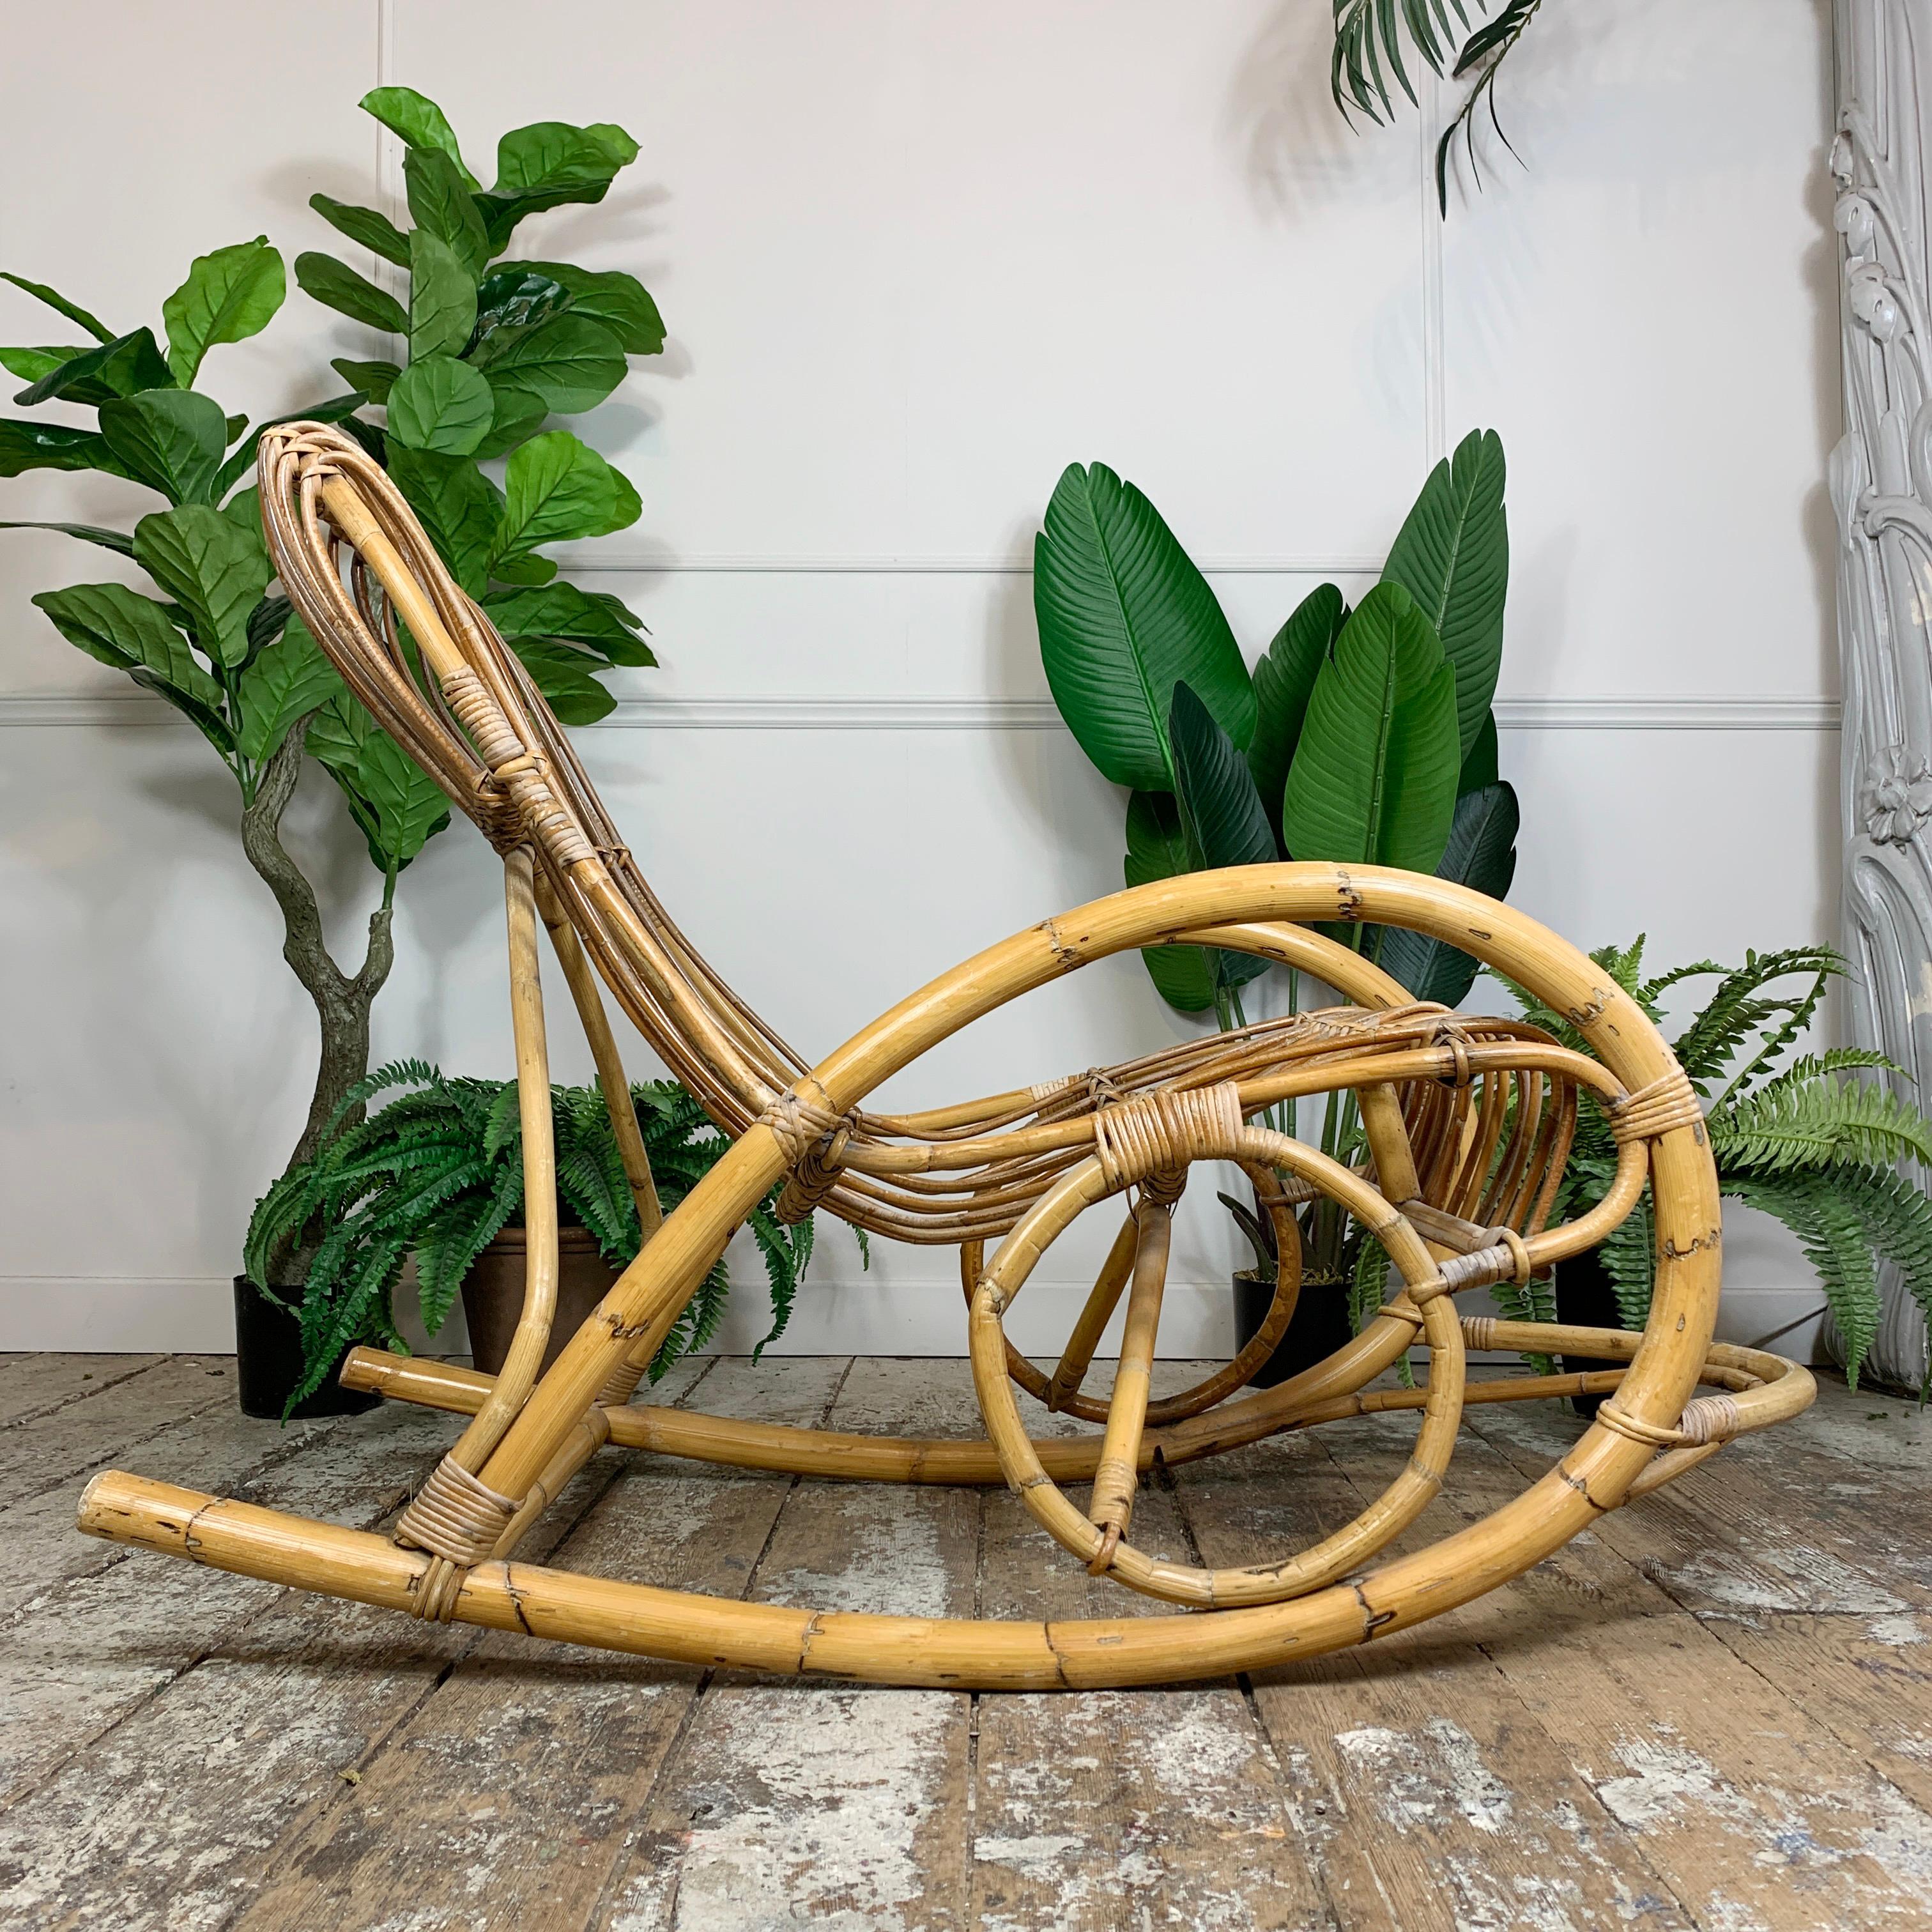 Mid-Century Modern Rocking Chair in Bamboo and Rattan Attributed to Franco Albini, 1950’s For Sale